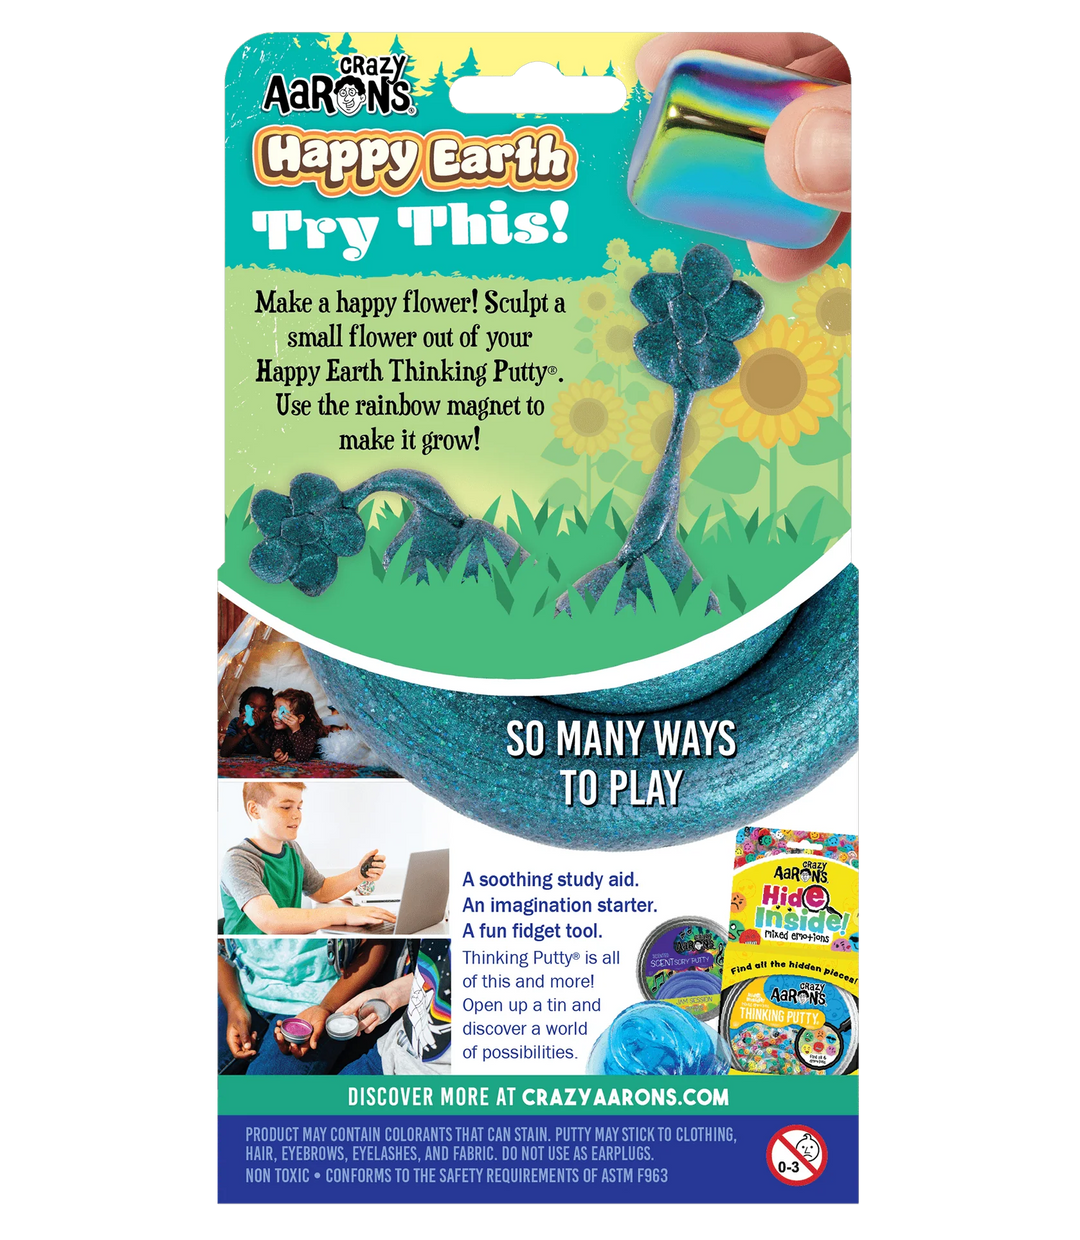 Thinking Putty - Happy Earth Magnetic Storm